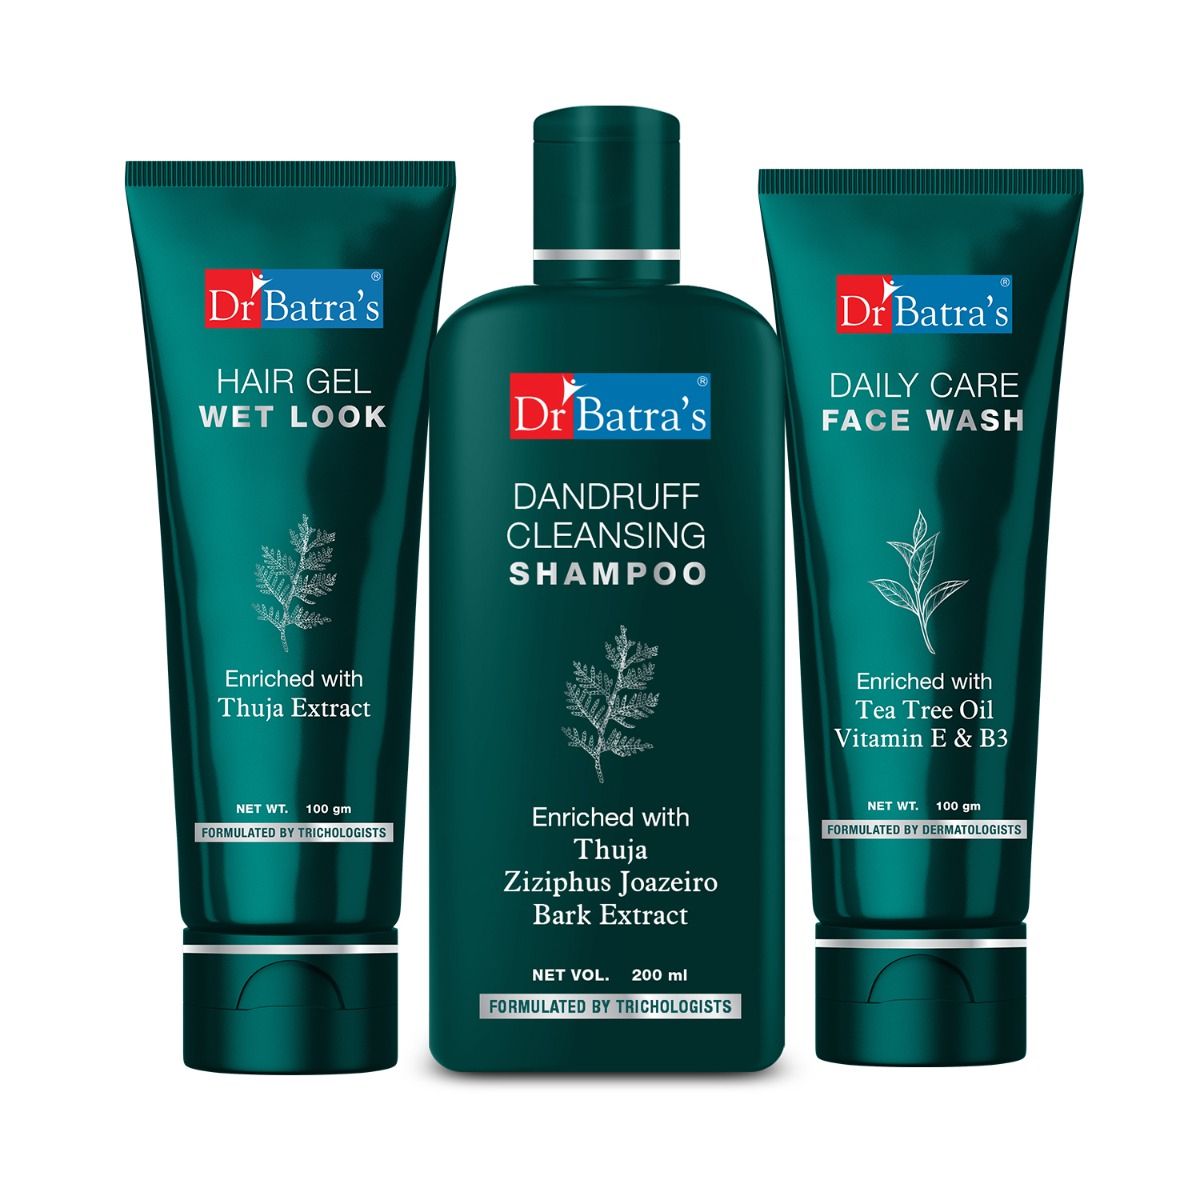     			Dr Batra's Dandruff Cleansing Shampoo - 200 ml, Hair Gel - 100 gm and Face Wash Daily Care - 100 gm (Pack of 3 for Men)